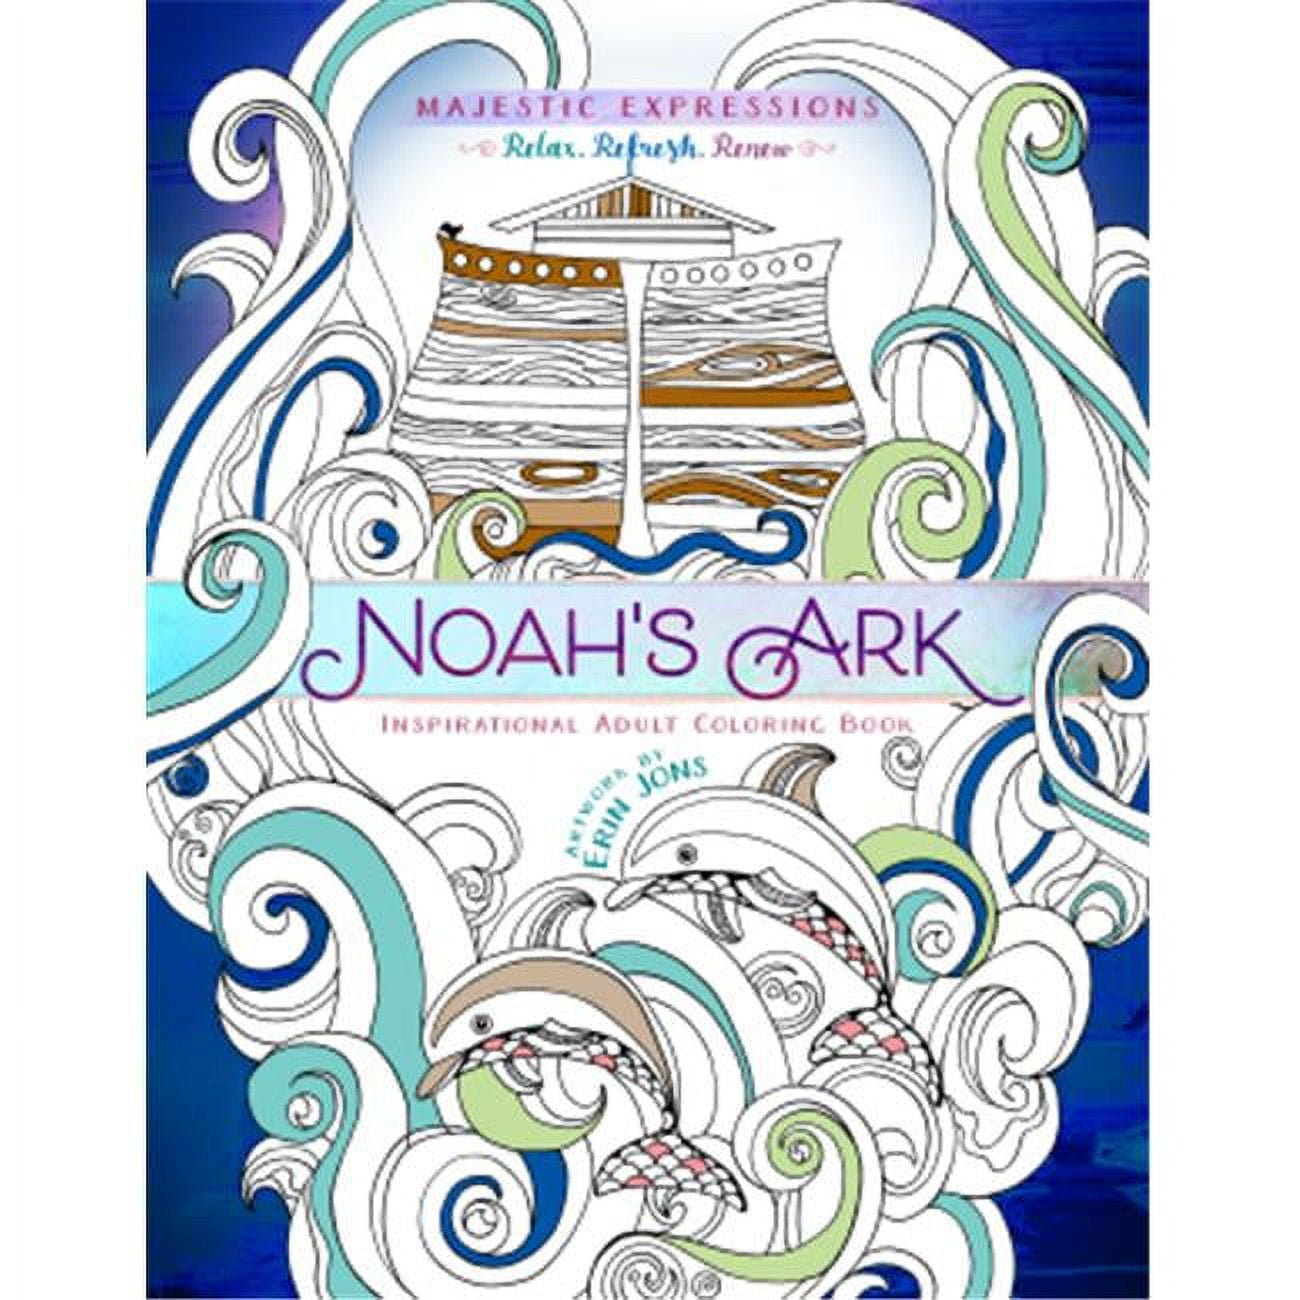 Papermate 18ct Black Pens Broadstreet Publishing Group 067729 Noahs Ark Adult Coloring Book - Majestic Expressions